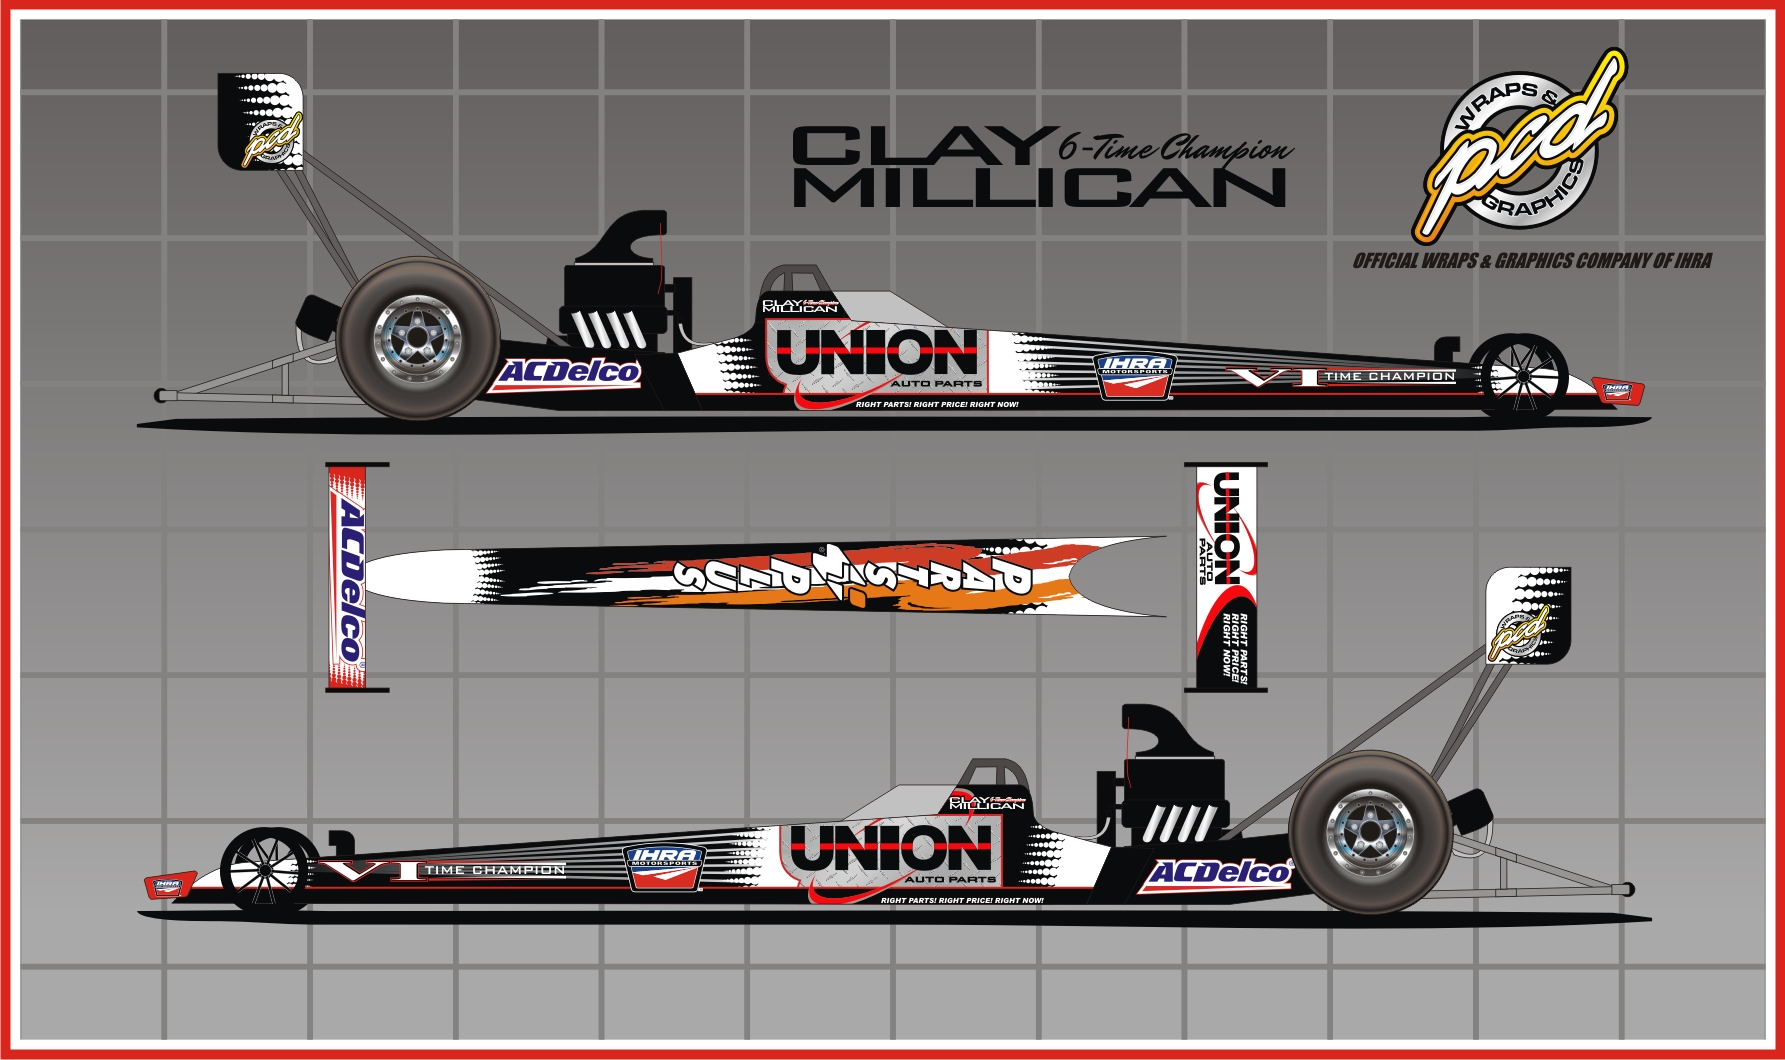 Six-time IHRA Top Fuel Champion Clay Millican to feature special design on dragster...